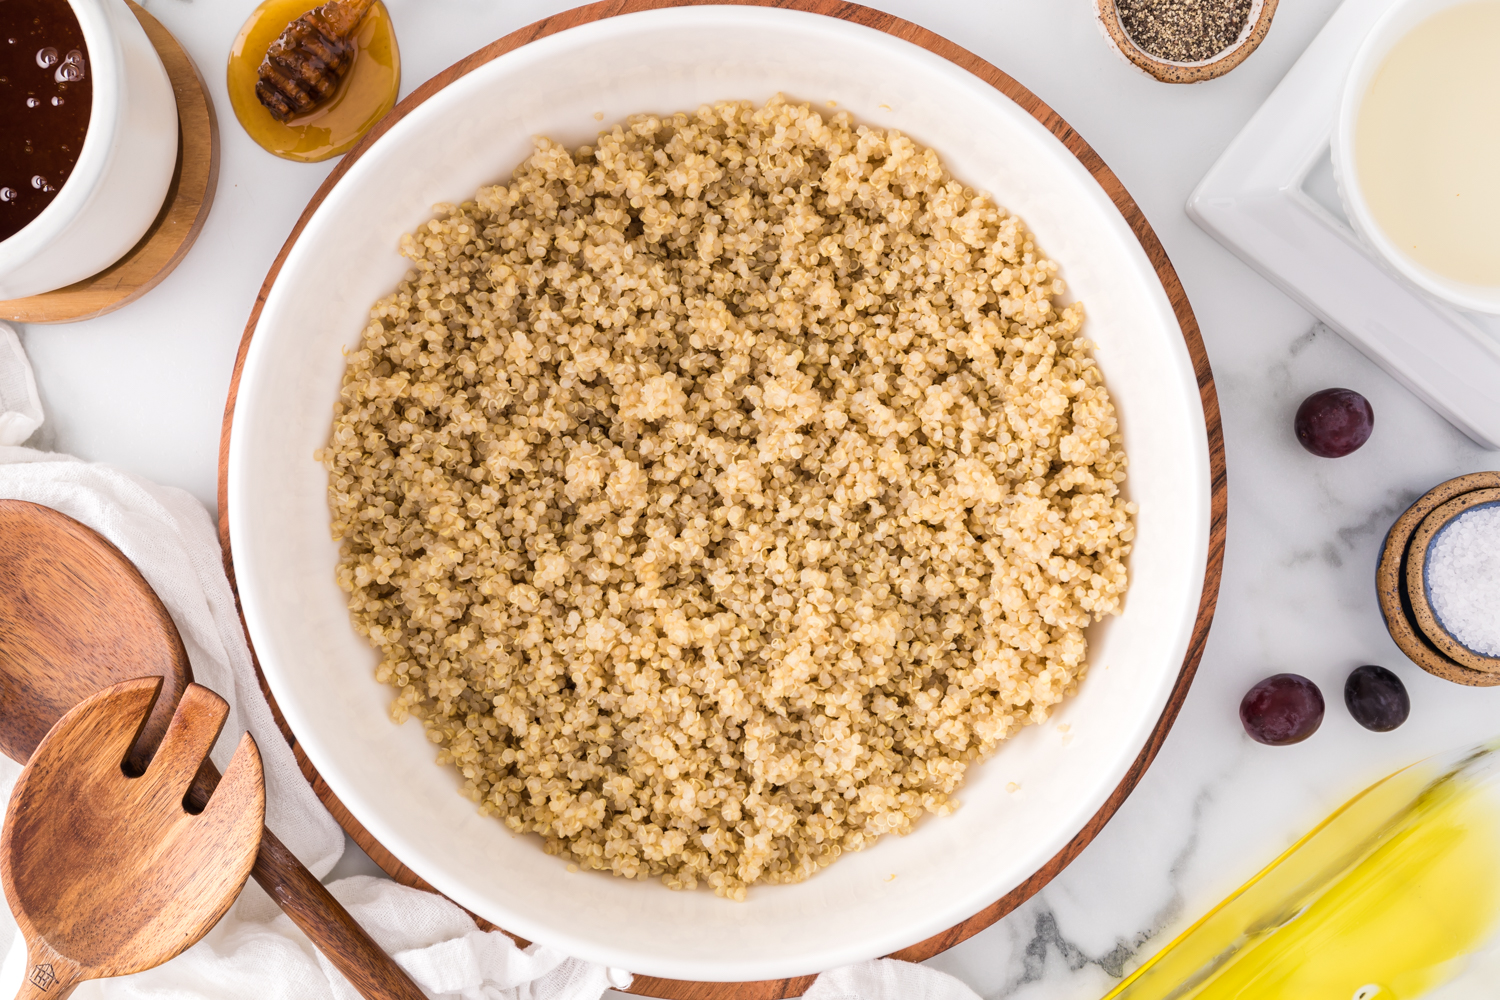 Quinoa in a large bowl, surrounded by other ingredients.